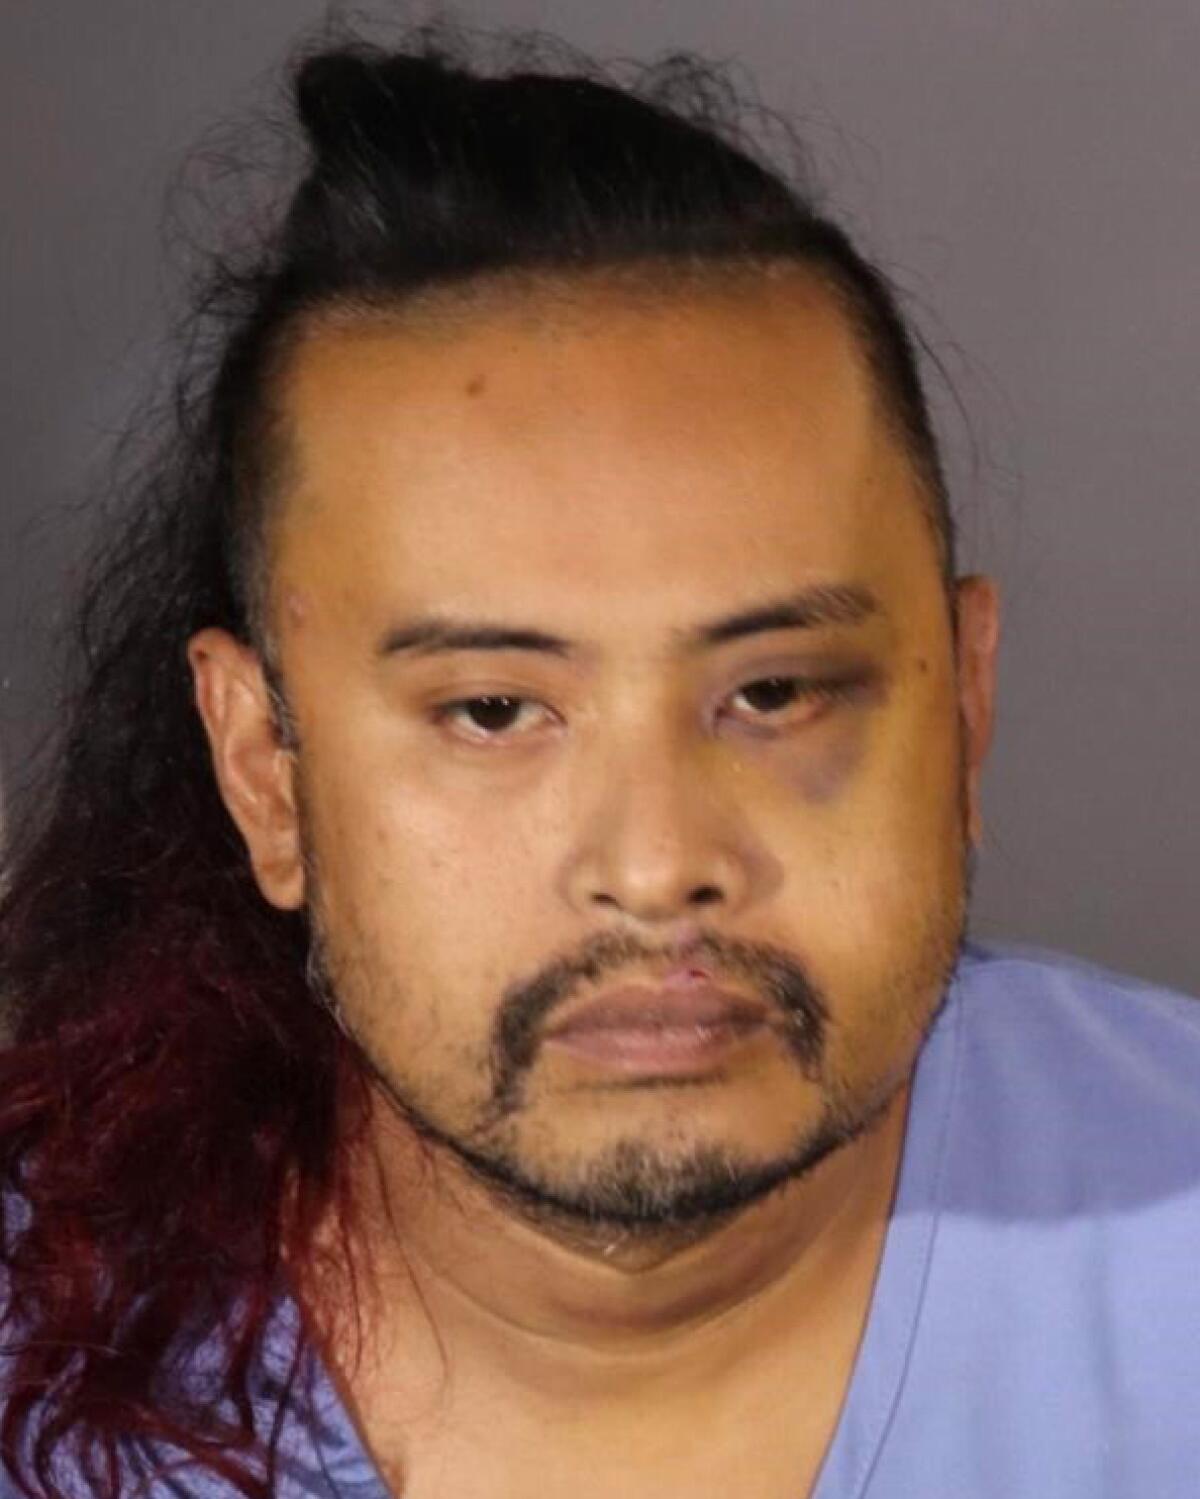 Matthew Scott Reyes was charged with six felony counts, including rape, forced oral copulation, and robbery